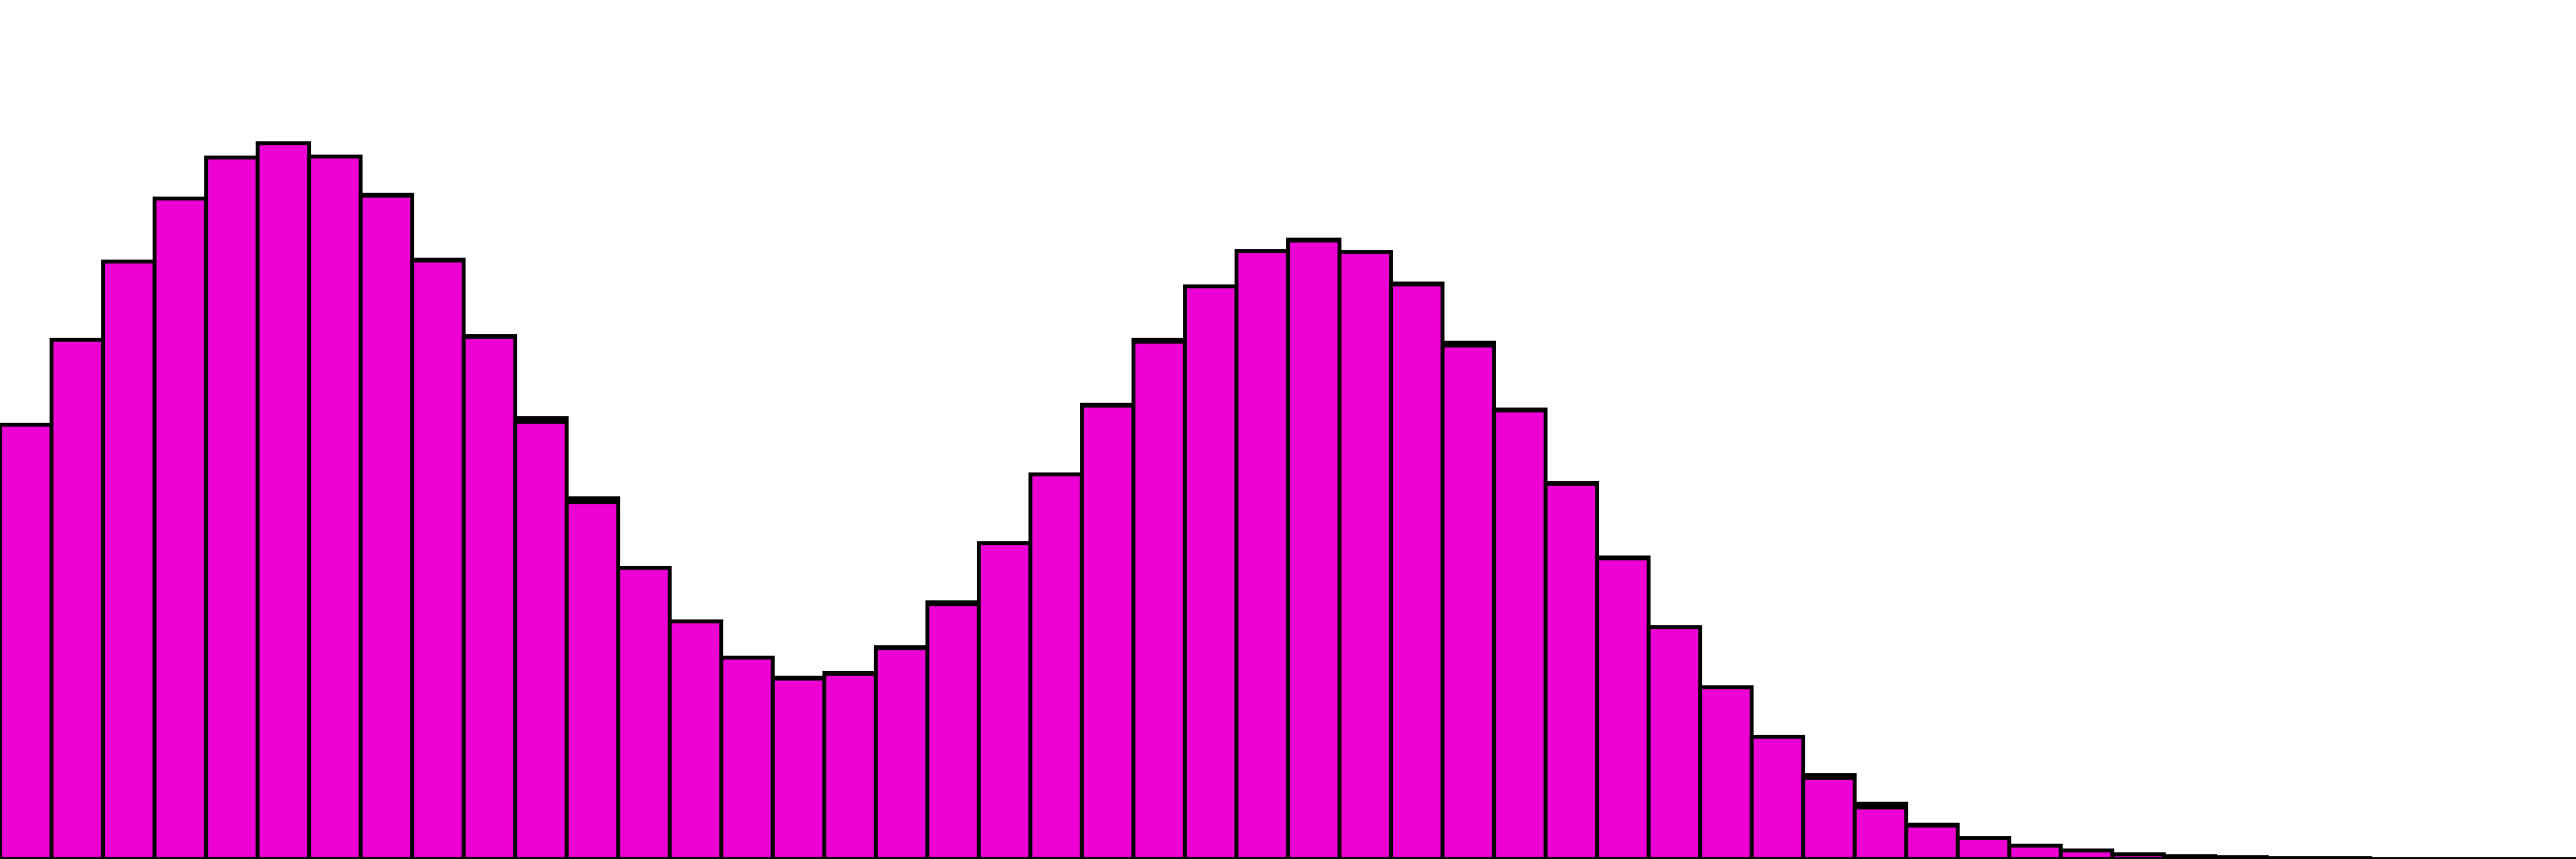 4_distributions_1_fixed